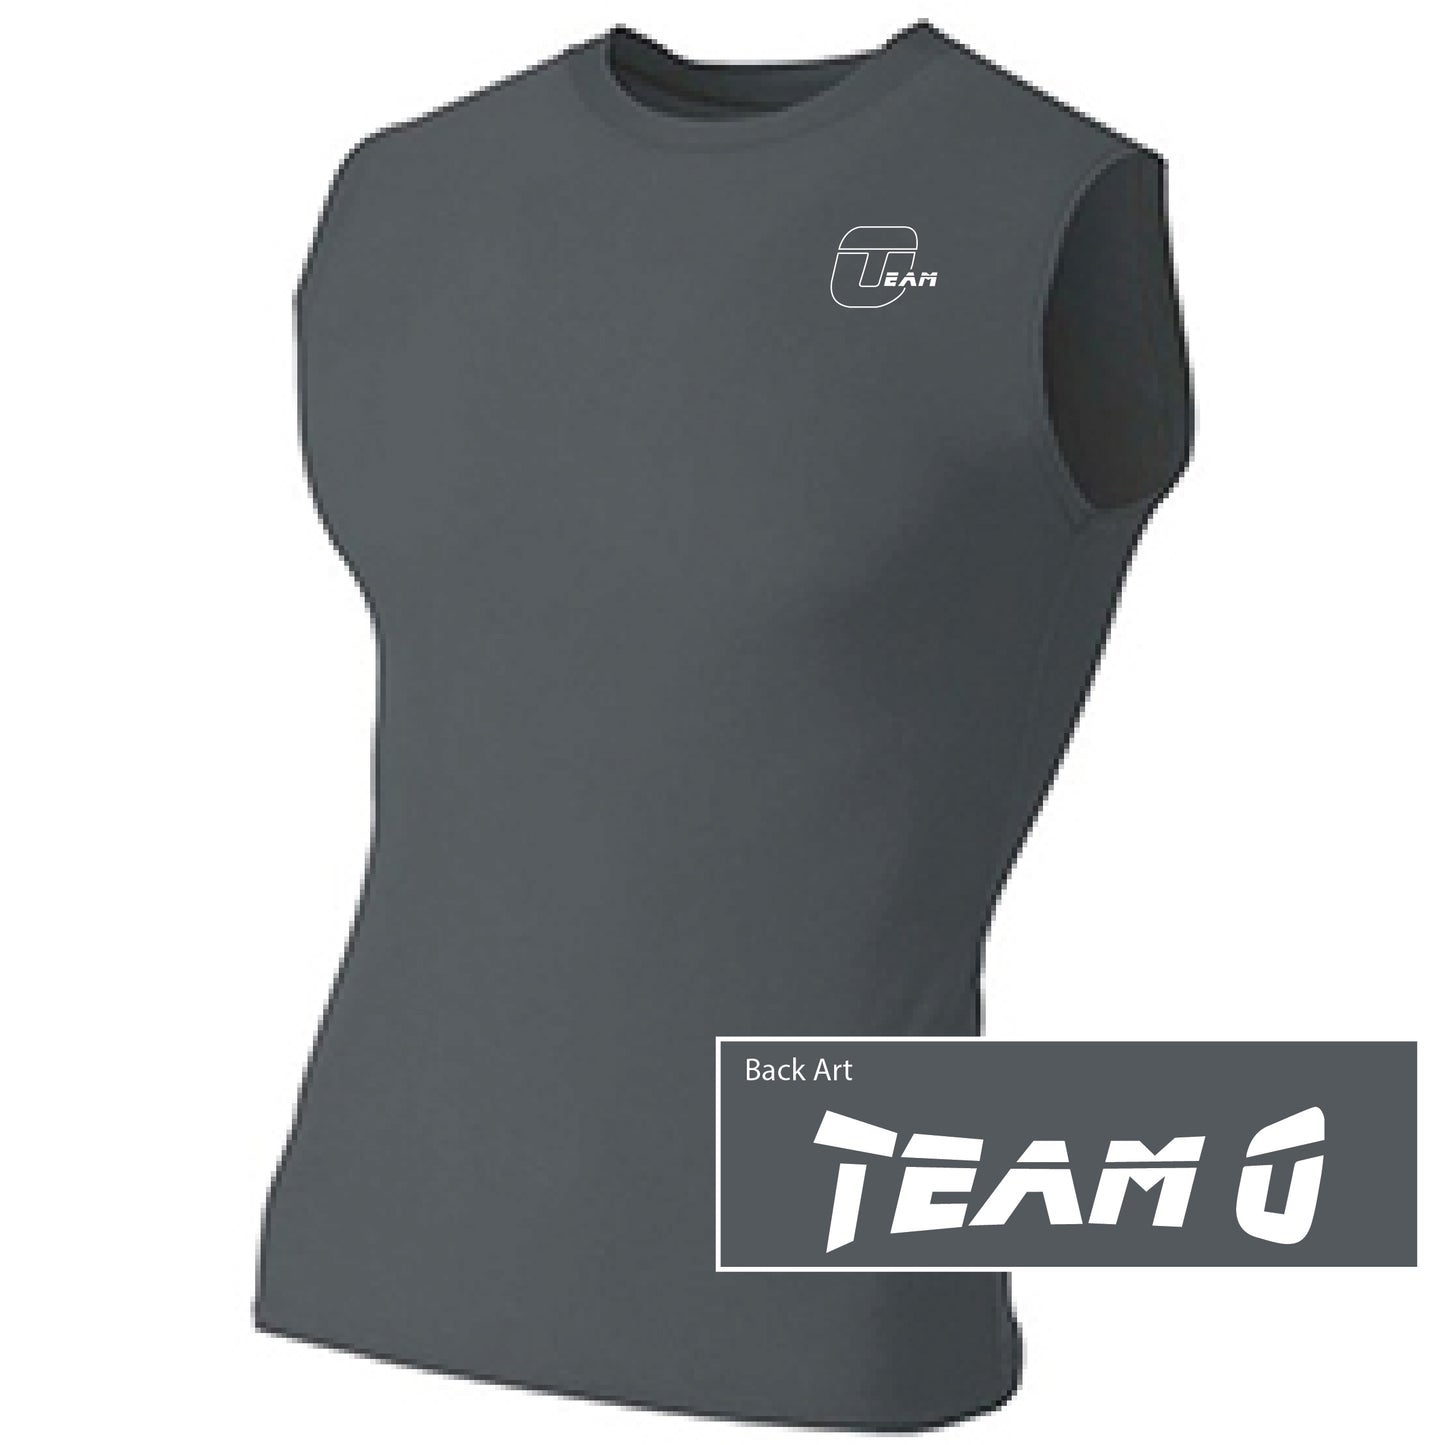 Team O A4 Men's Compression Muscle Shirt